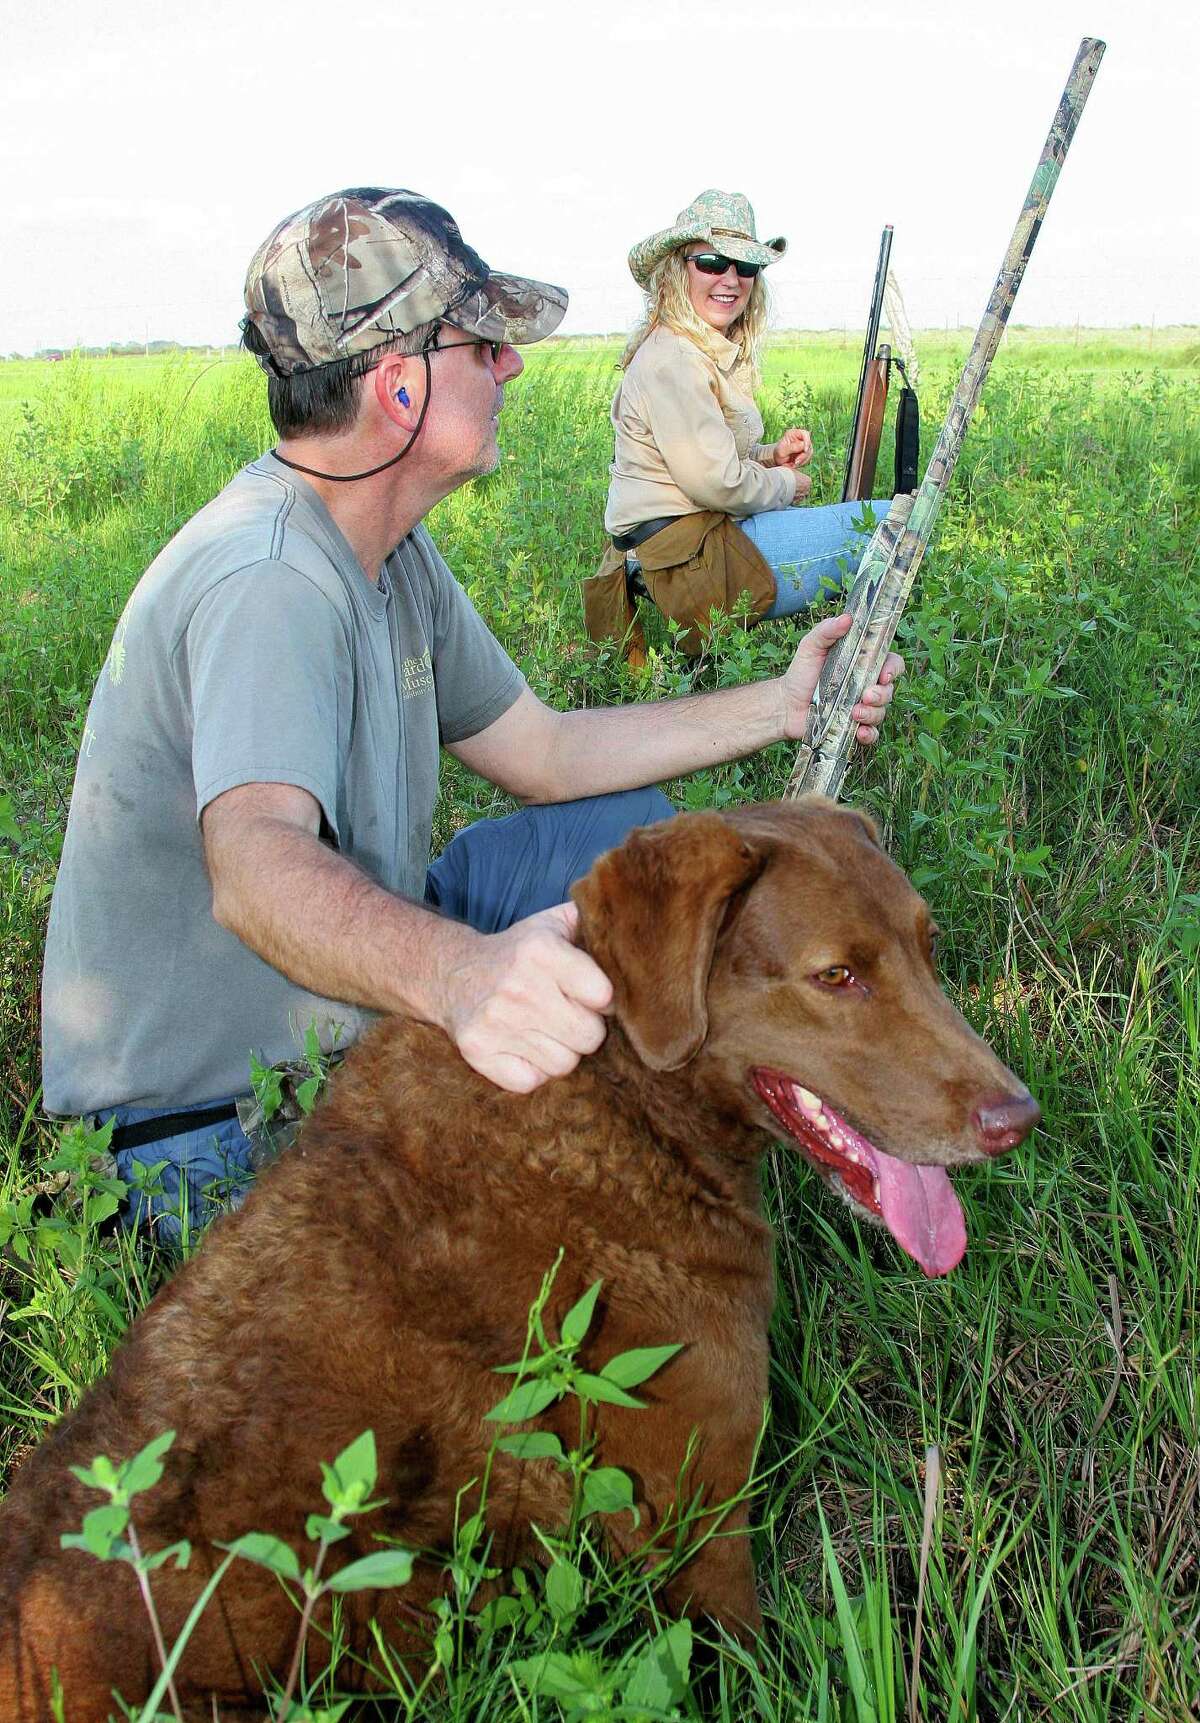 Texas hunters in 2017 tied the record for the lowest number of firearms-related accidents and set a record for lowest number per 100,000 licenses sold, with accident rates and fatalities dropping more than 90 percent since 1966 despite hunter numbers doubling.